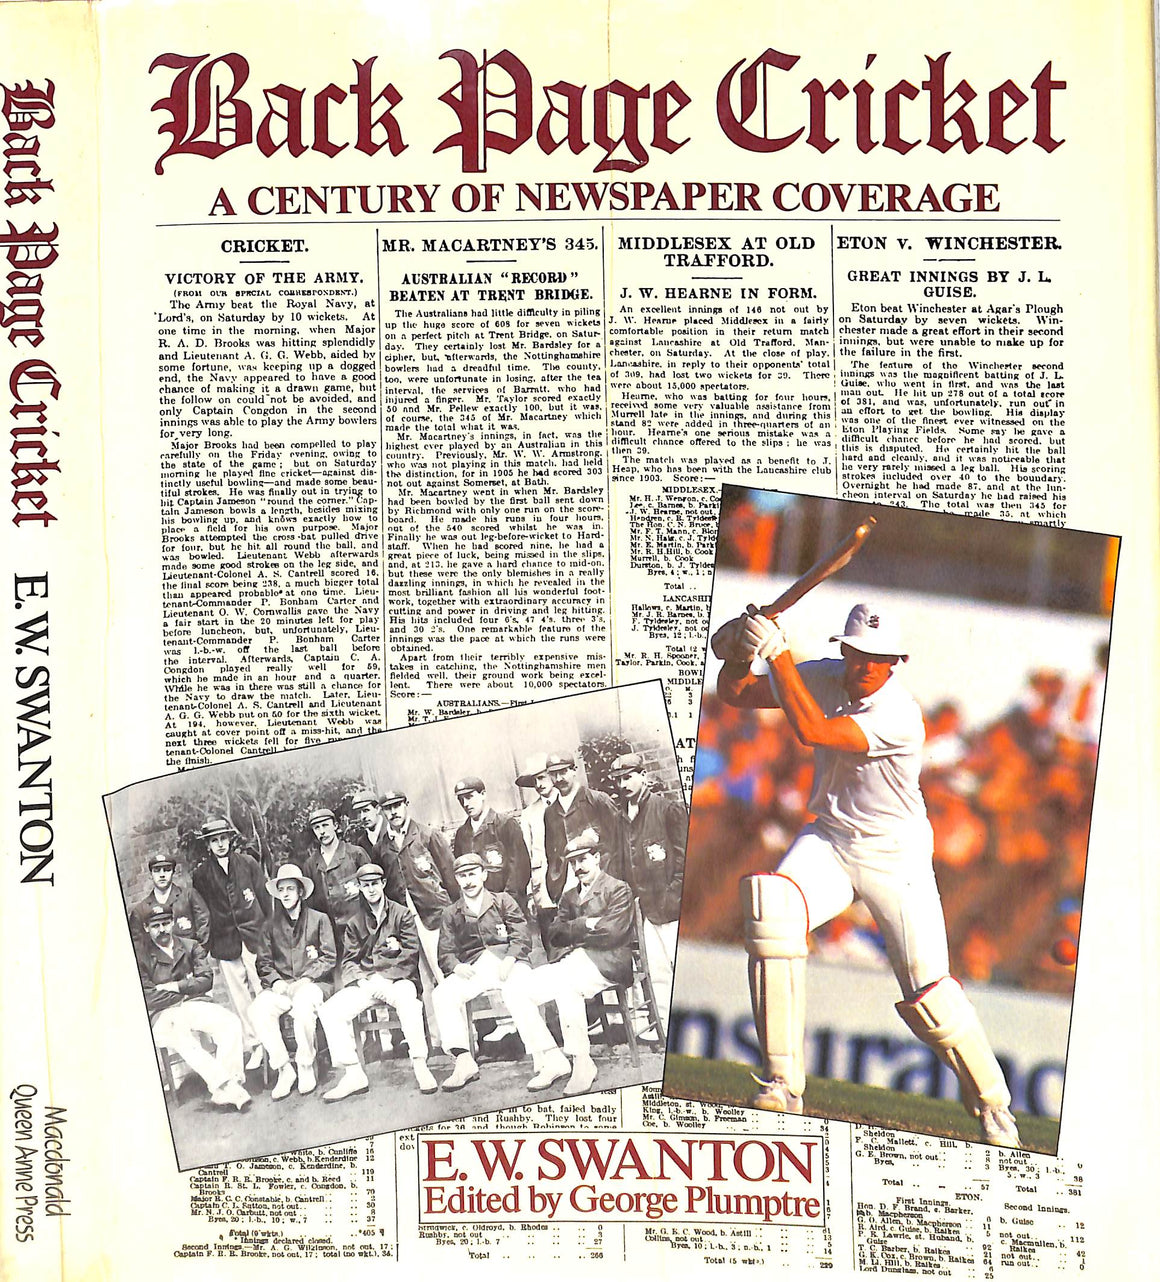 "Back Page Cricket: A Century Of Newspaper Coverage" 1987 SWANTON, E.W.